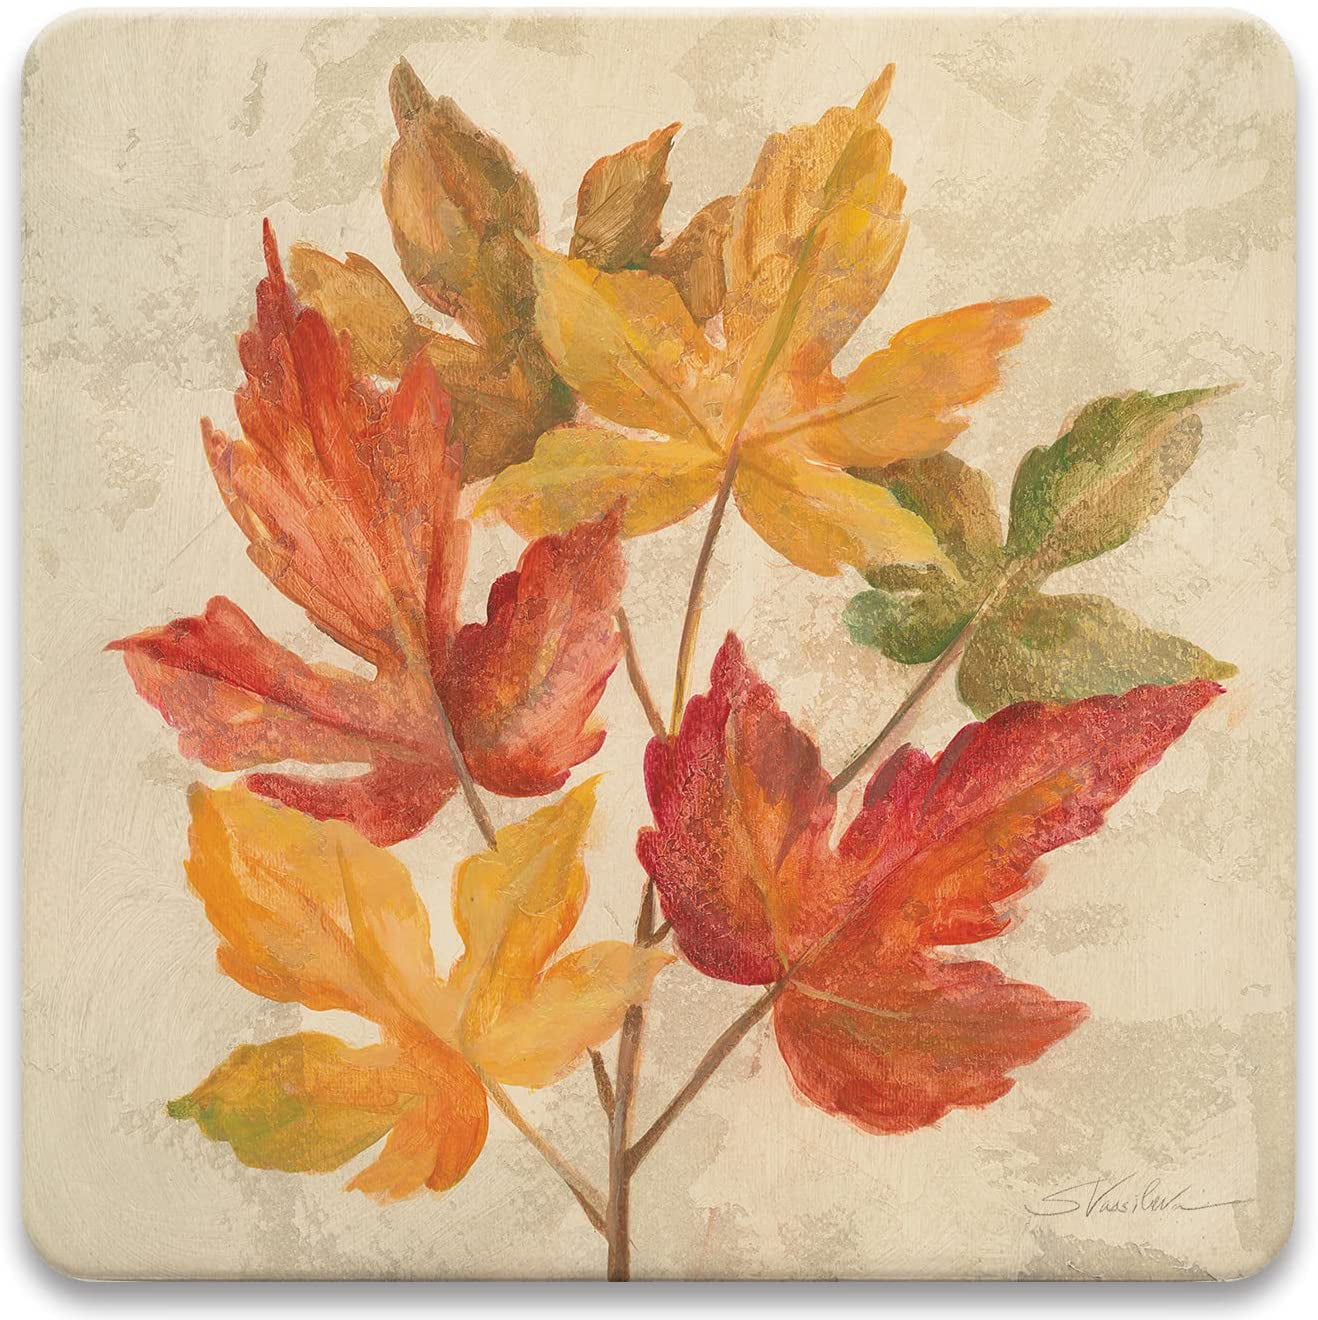 CoasterStone Set-November Leaves-Autumn Themed Absorbent Drink Coasters Fall Decor Large 4.25 Inch Width